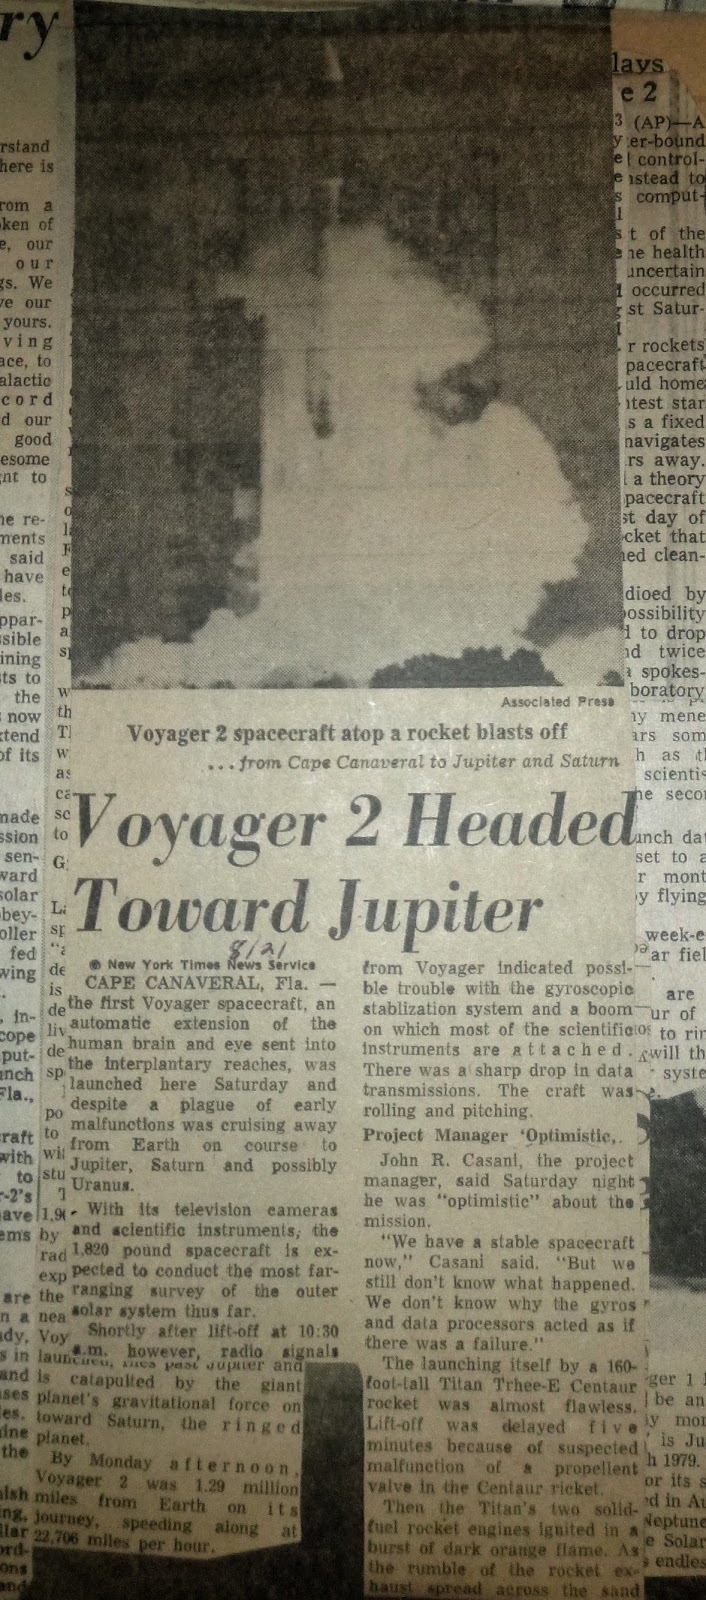 Contemporary newspaper coverage of Voyager (2) | The Planetary Society